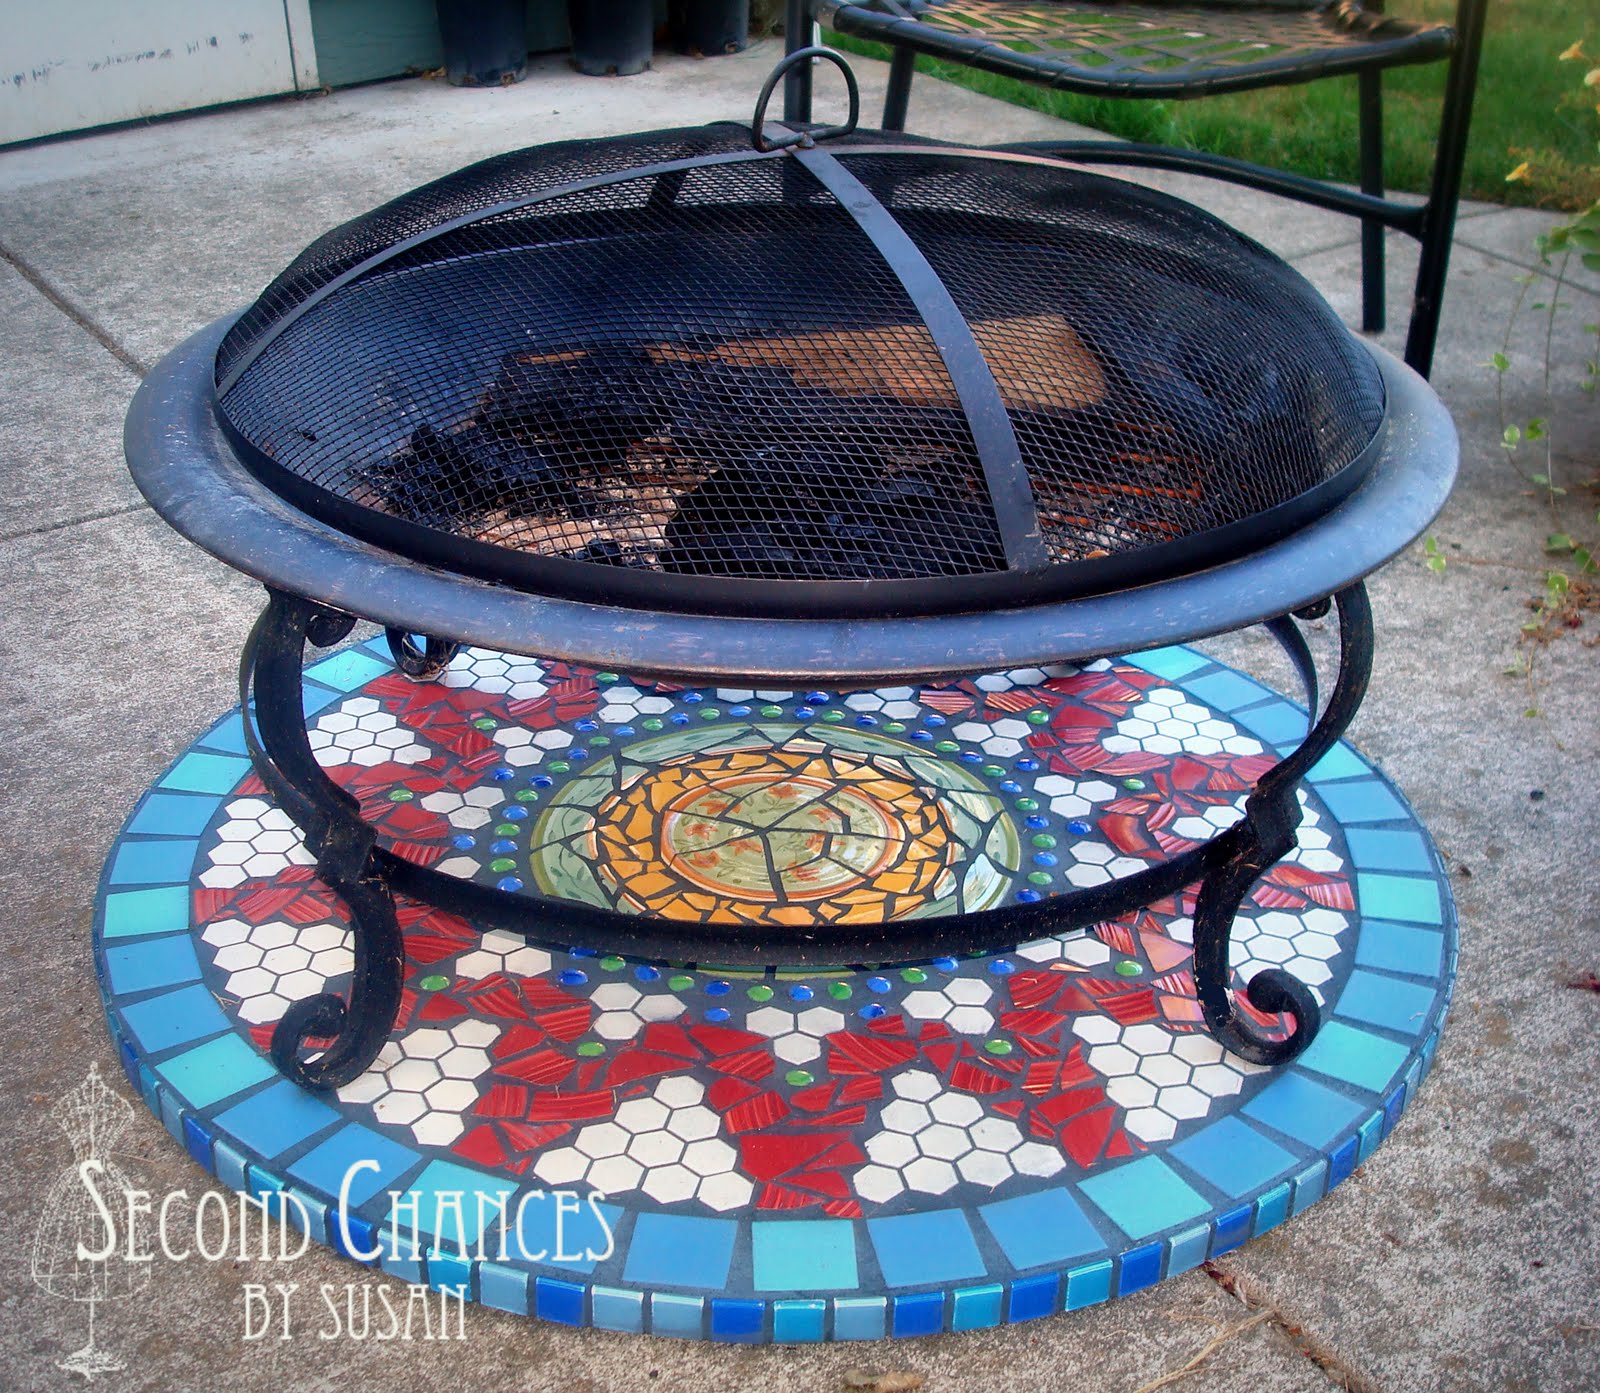 Second Chances by Susan: Is That A Rug Under Your Fire Pit?!